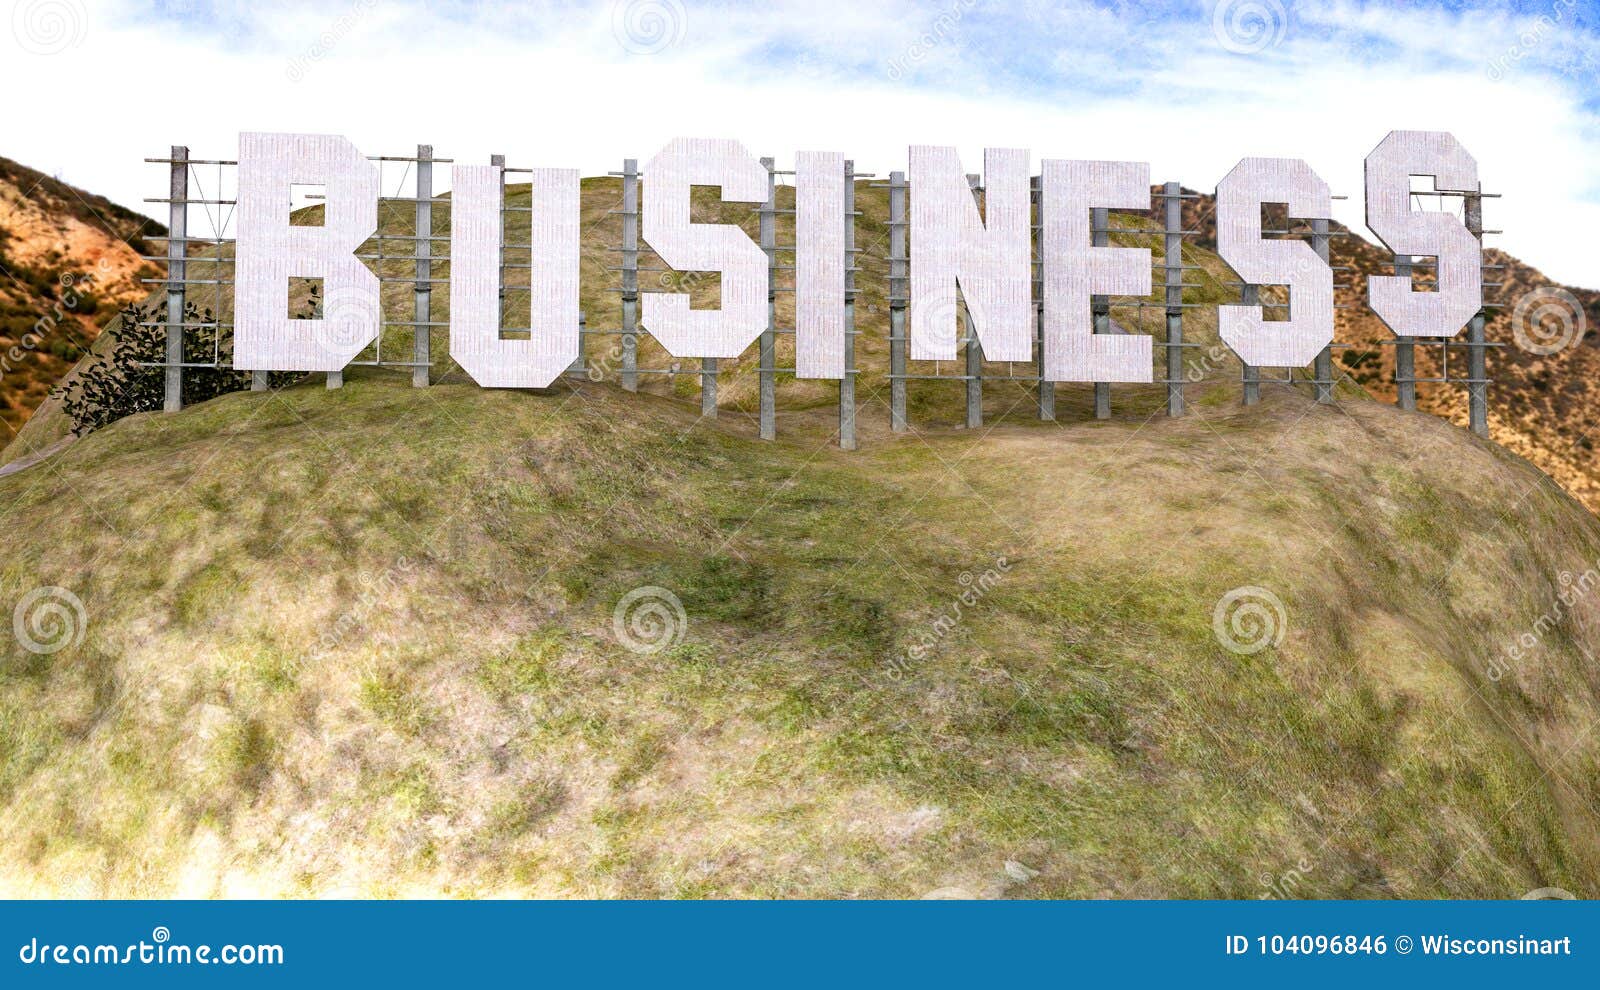 hollywood california sign spells business